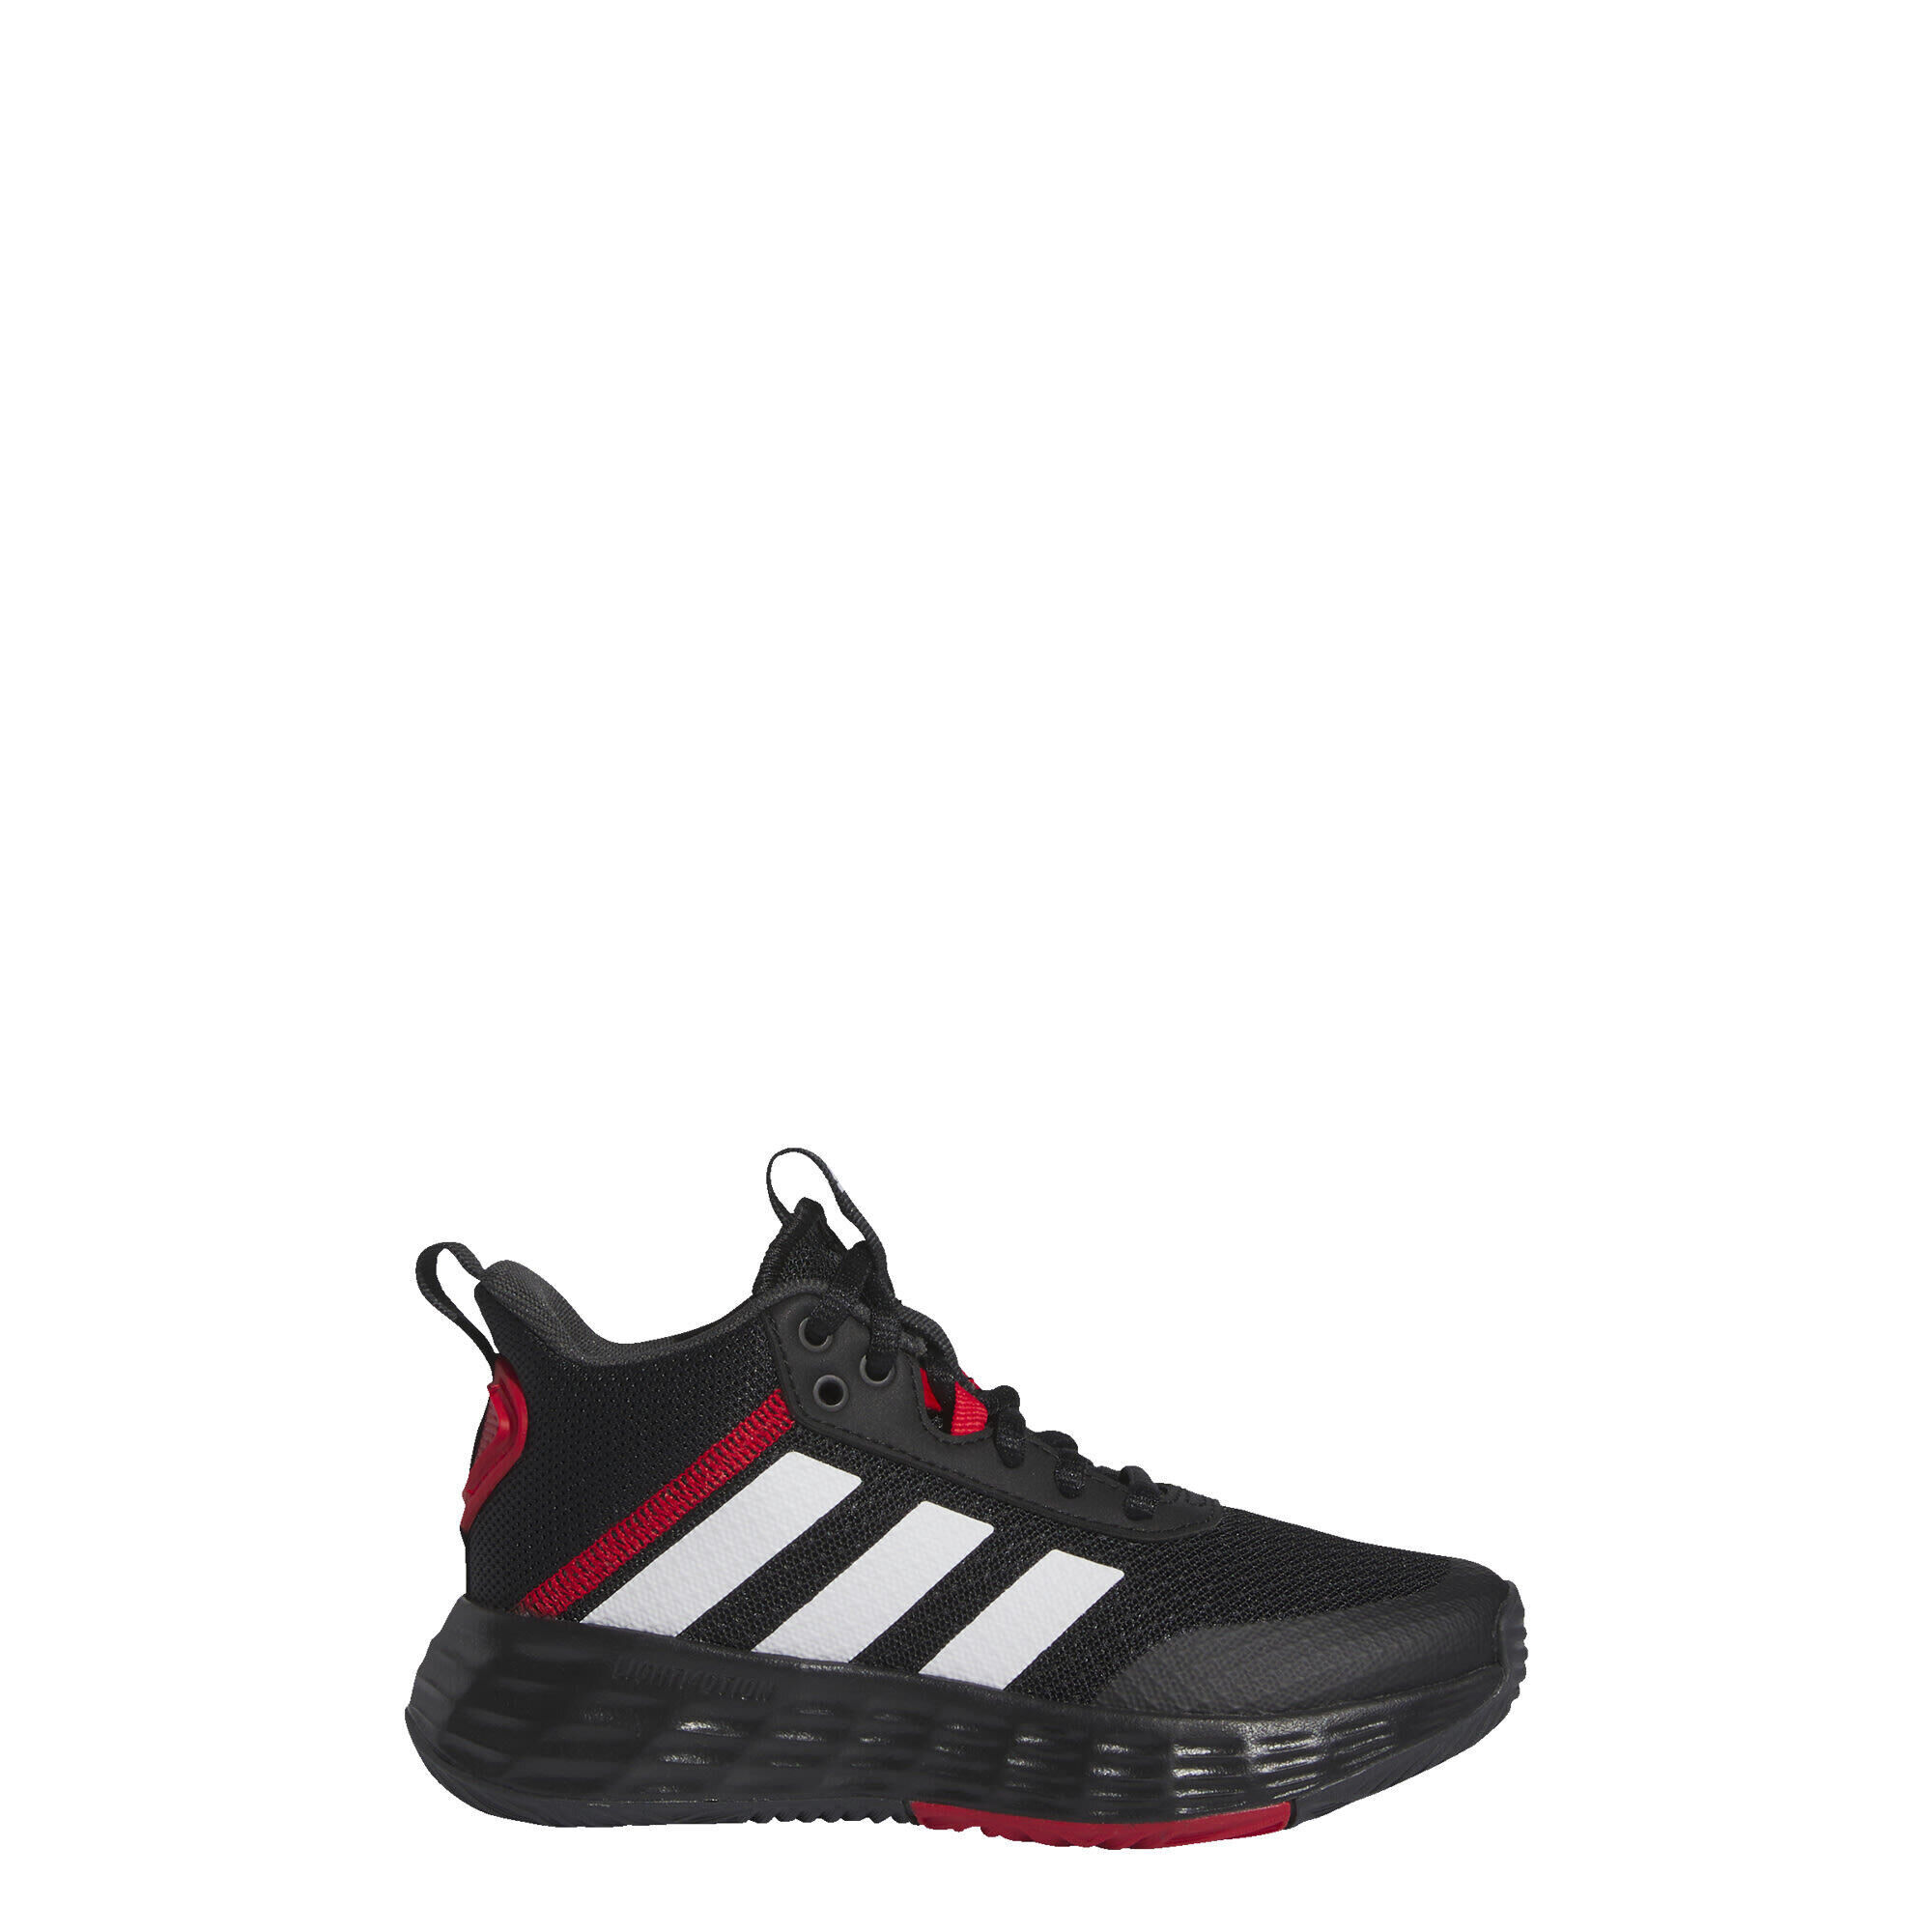 ADIDAS Ownthegame 2.0 Shoes